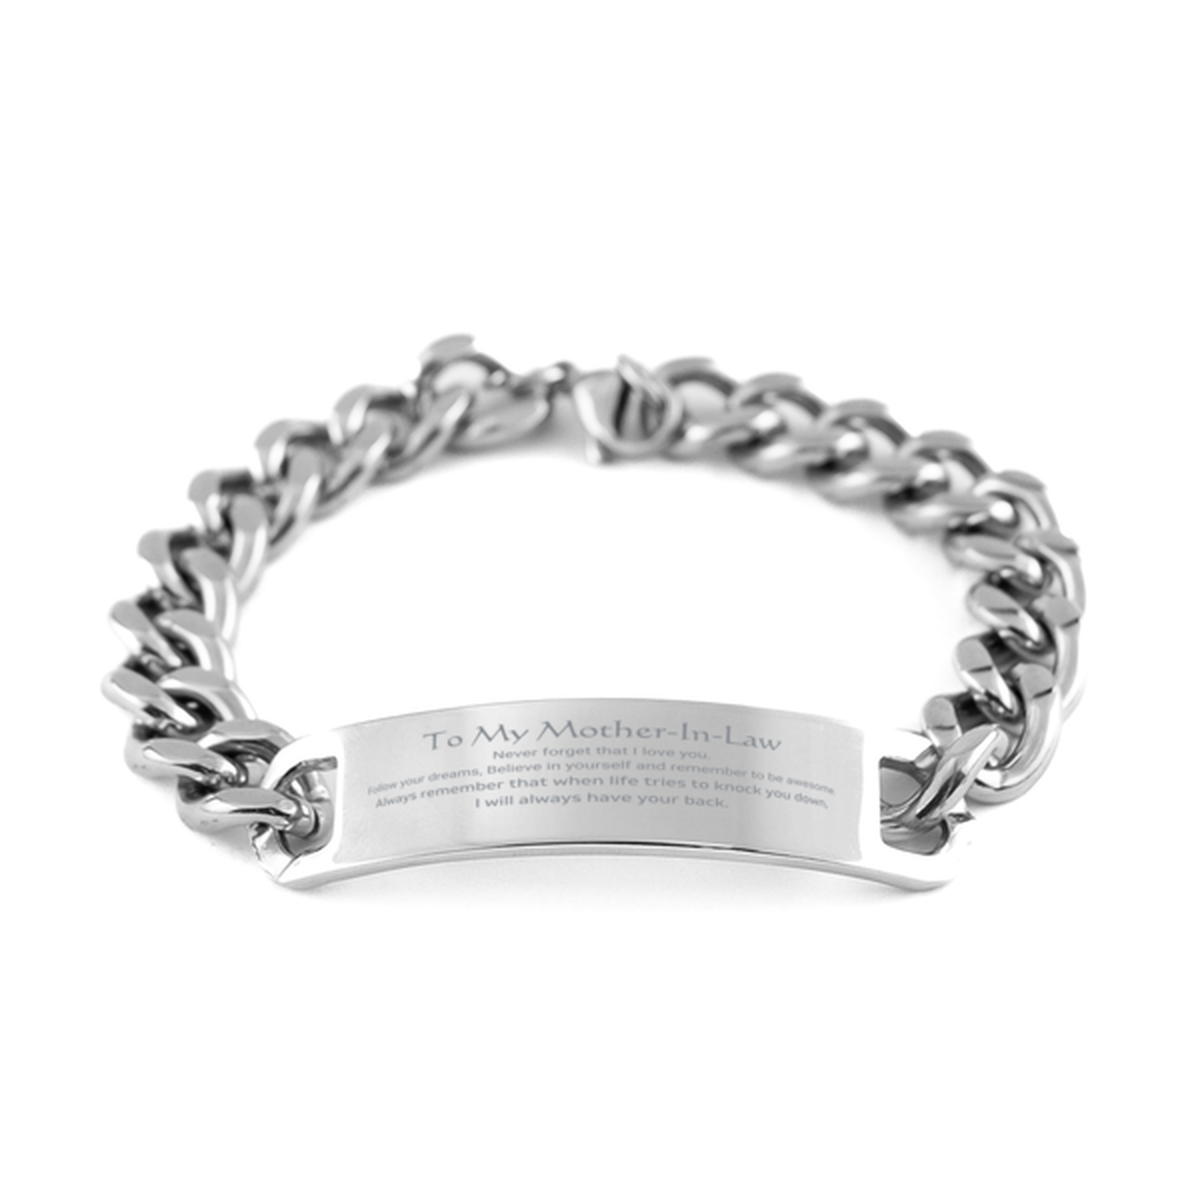 Inspirational Gifts for Mother-In-Law, Follow your dreams, Believe in yourself, Mother-In-Law Cuban Chain Stainless Steel Bracelet, Birthday Christmas Unique Gifts For Mother-In-Law